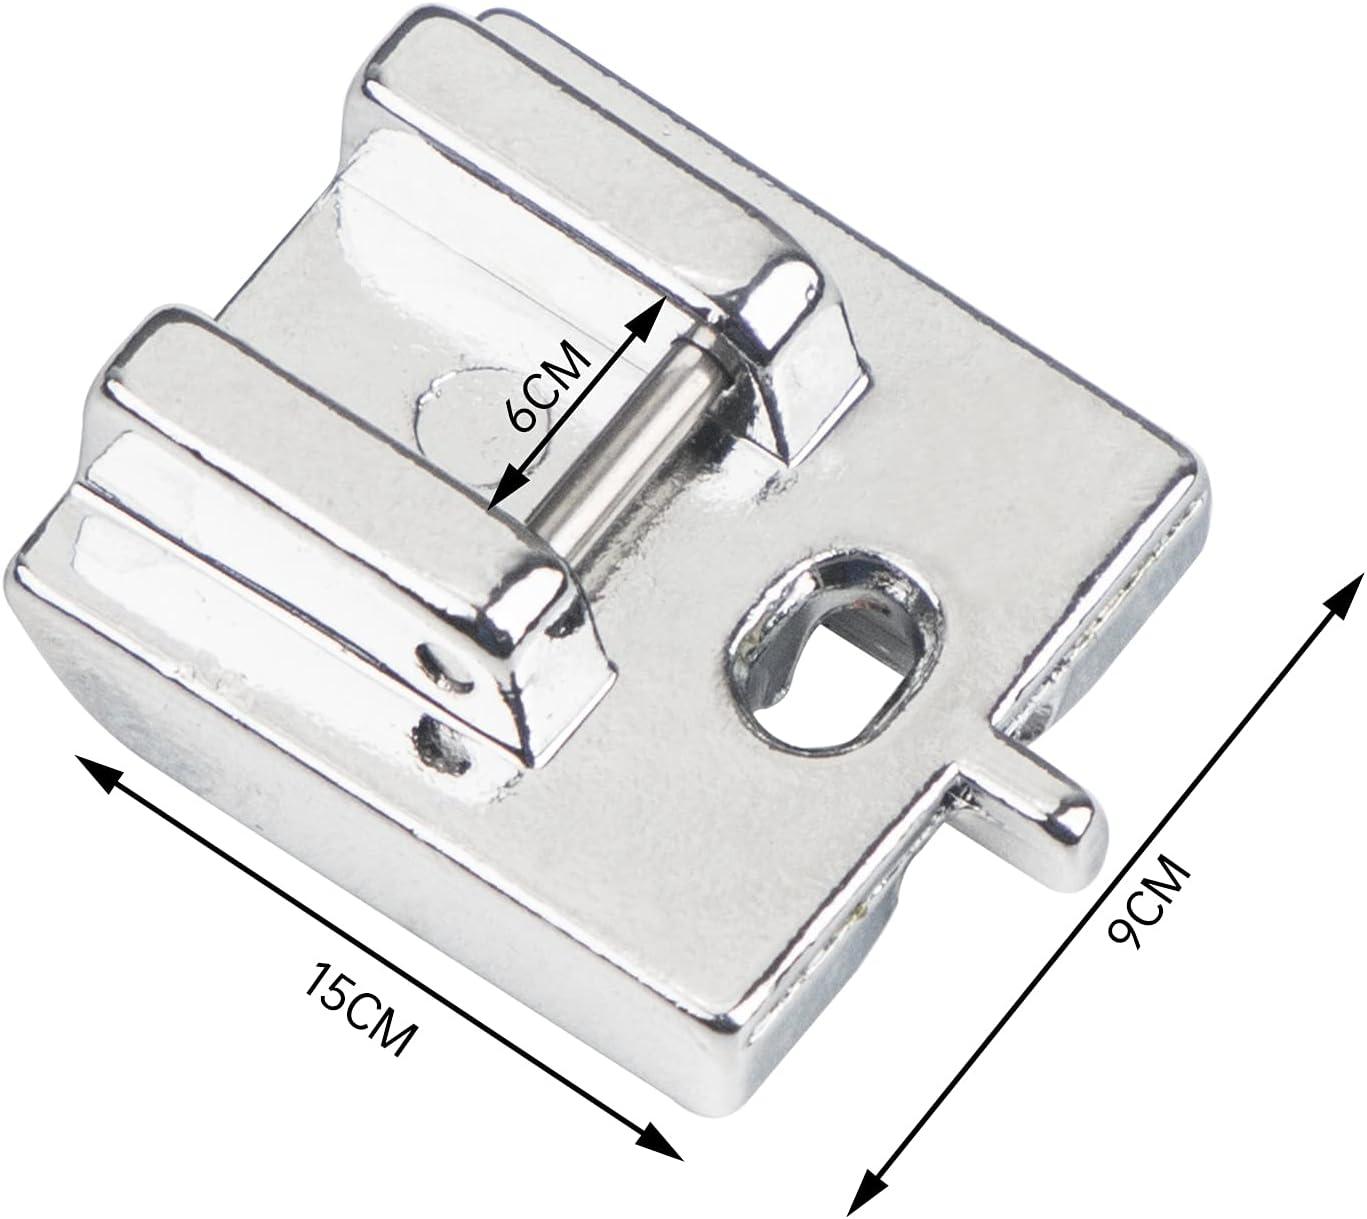 Invisible Zipper Foot Sewing Machine Presser Foot for Sewing Zippers - Fit  for Singer, Brother, Babylock, Household Low Shank Sewing Machine